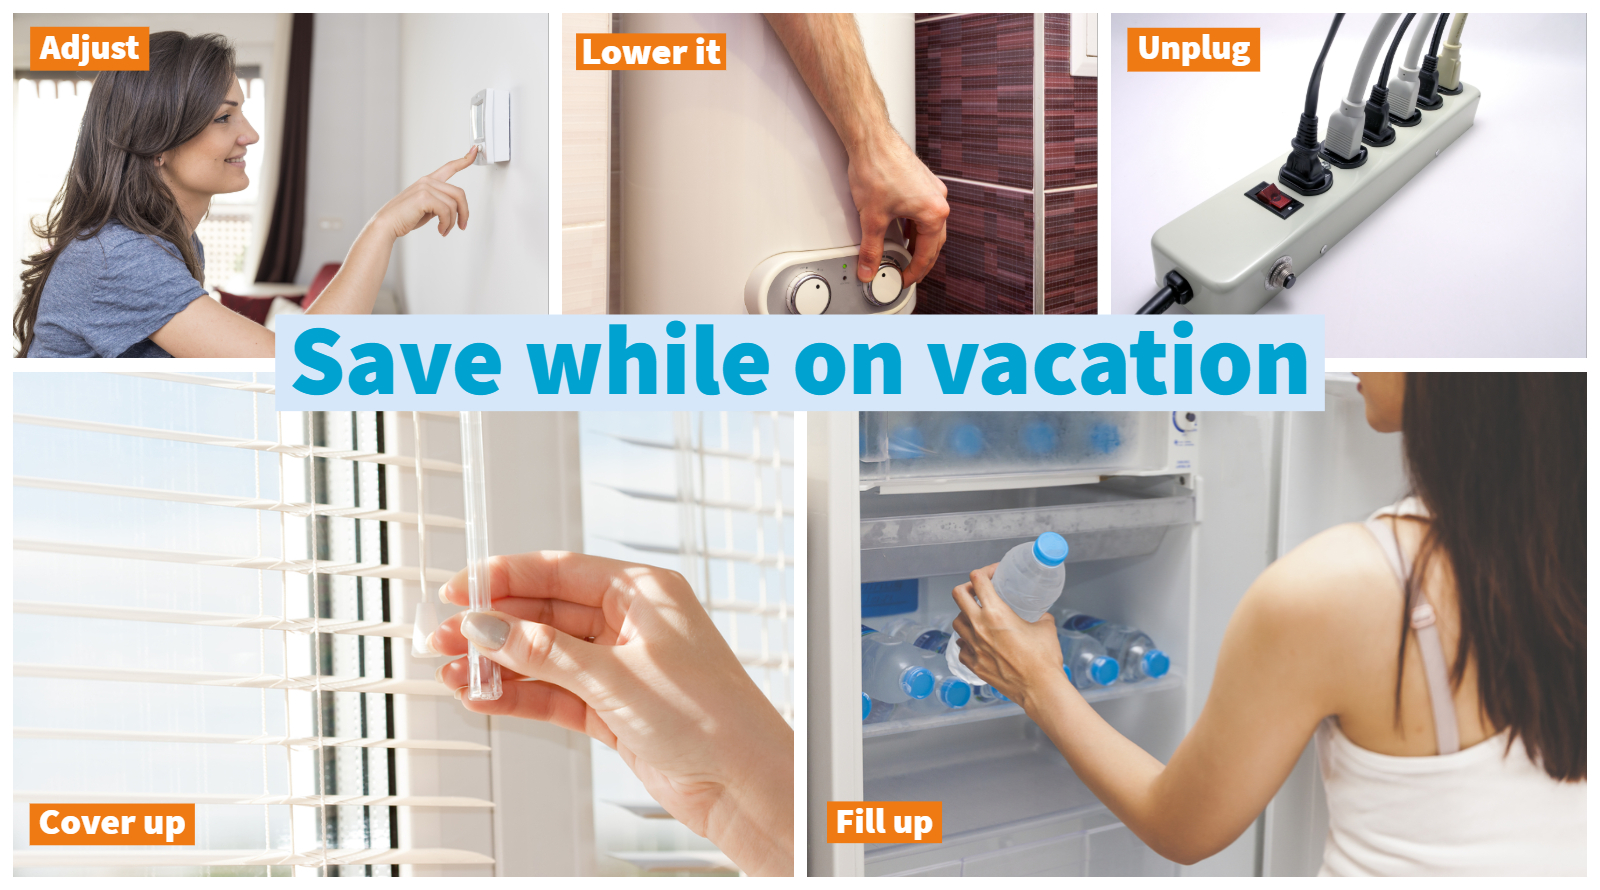 (Image) Save while on vacation